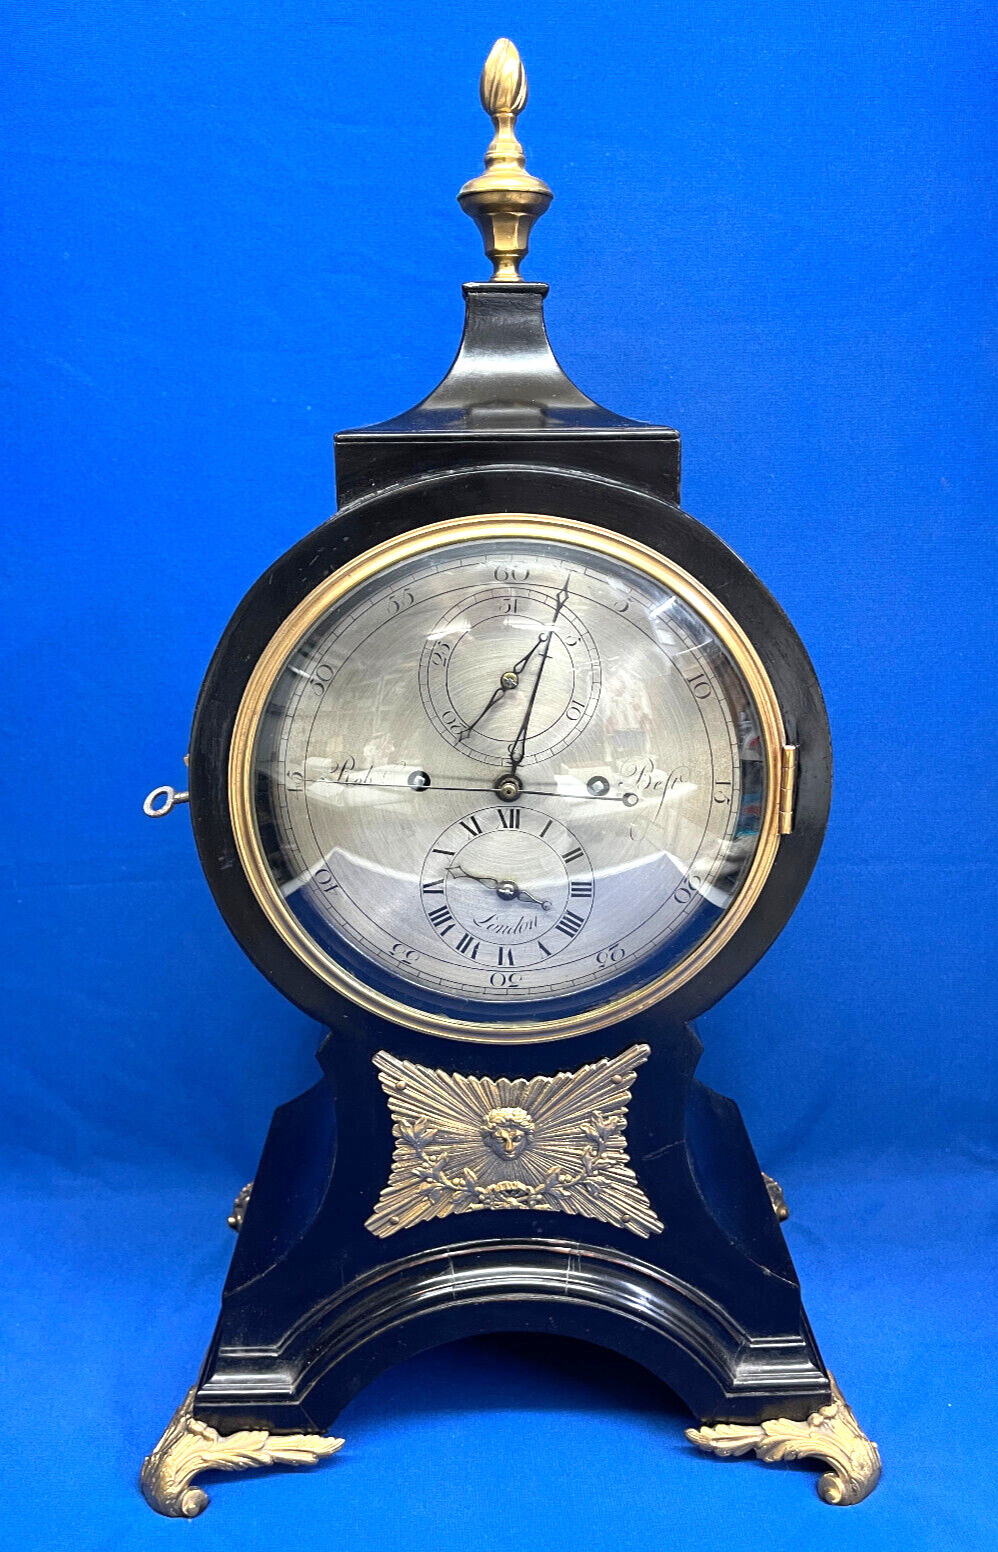 Extremely Rare Antique 1796 English Astronomical Double Fusee Mantel Clock